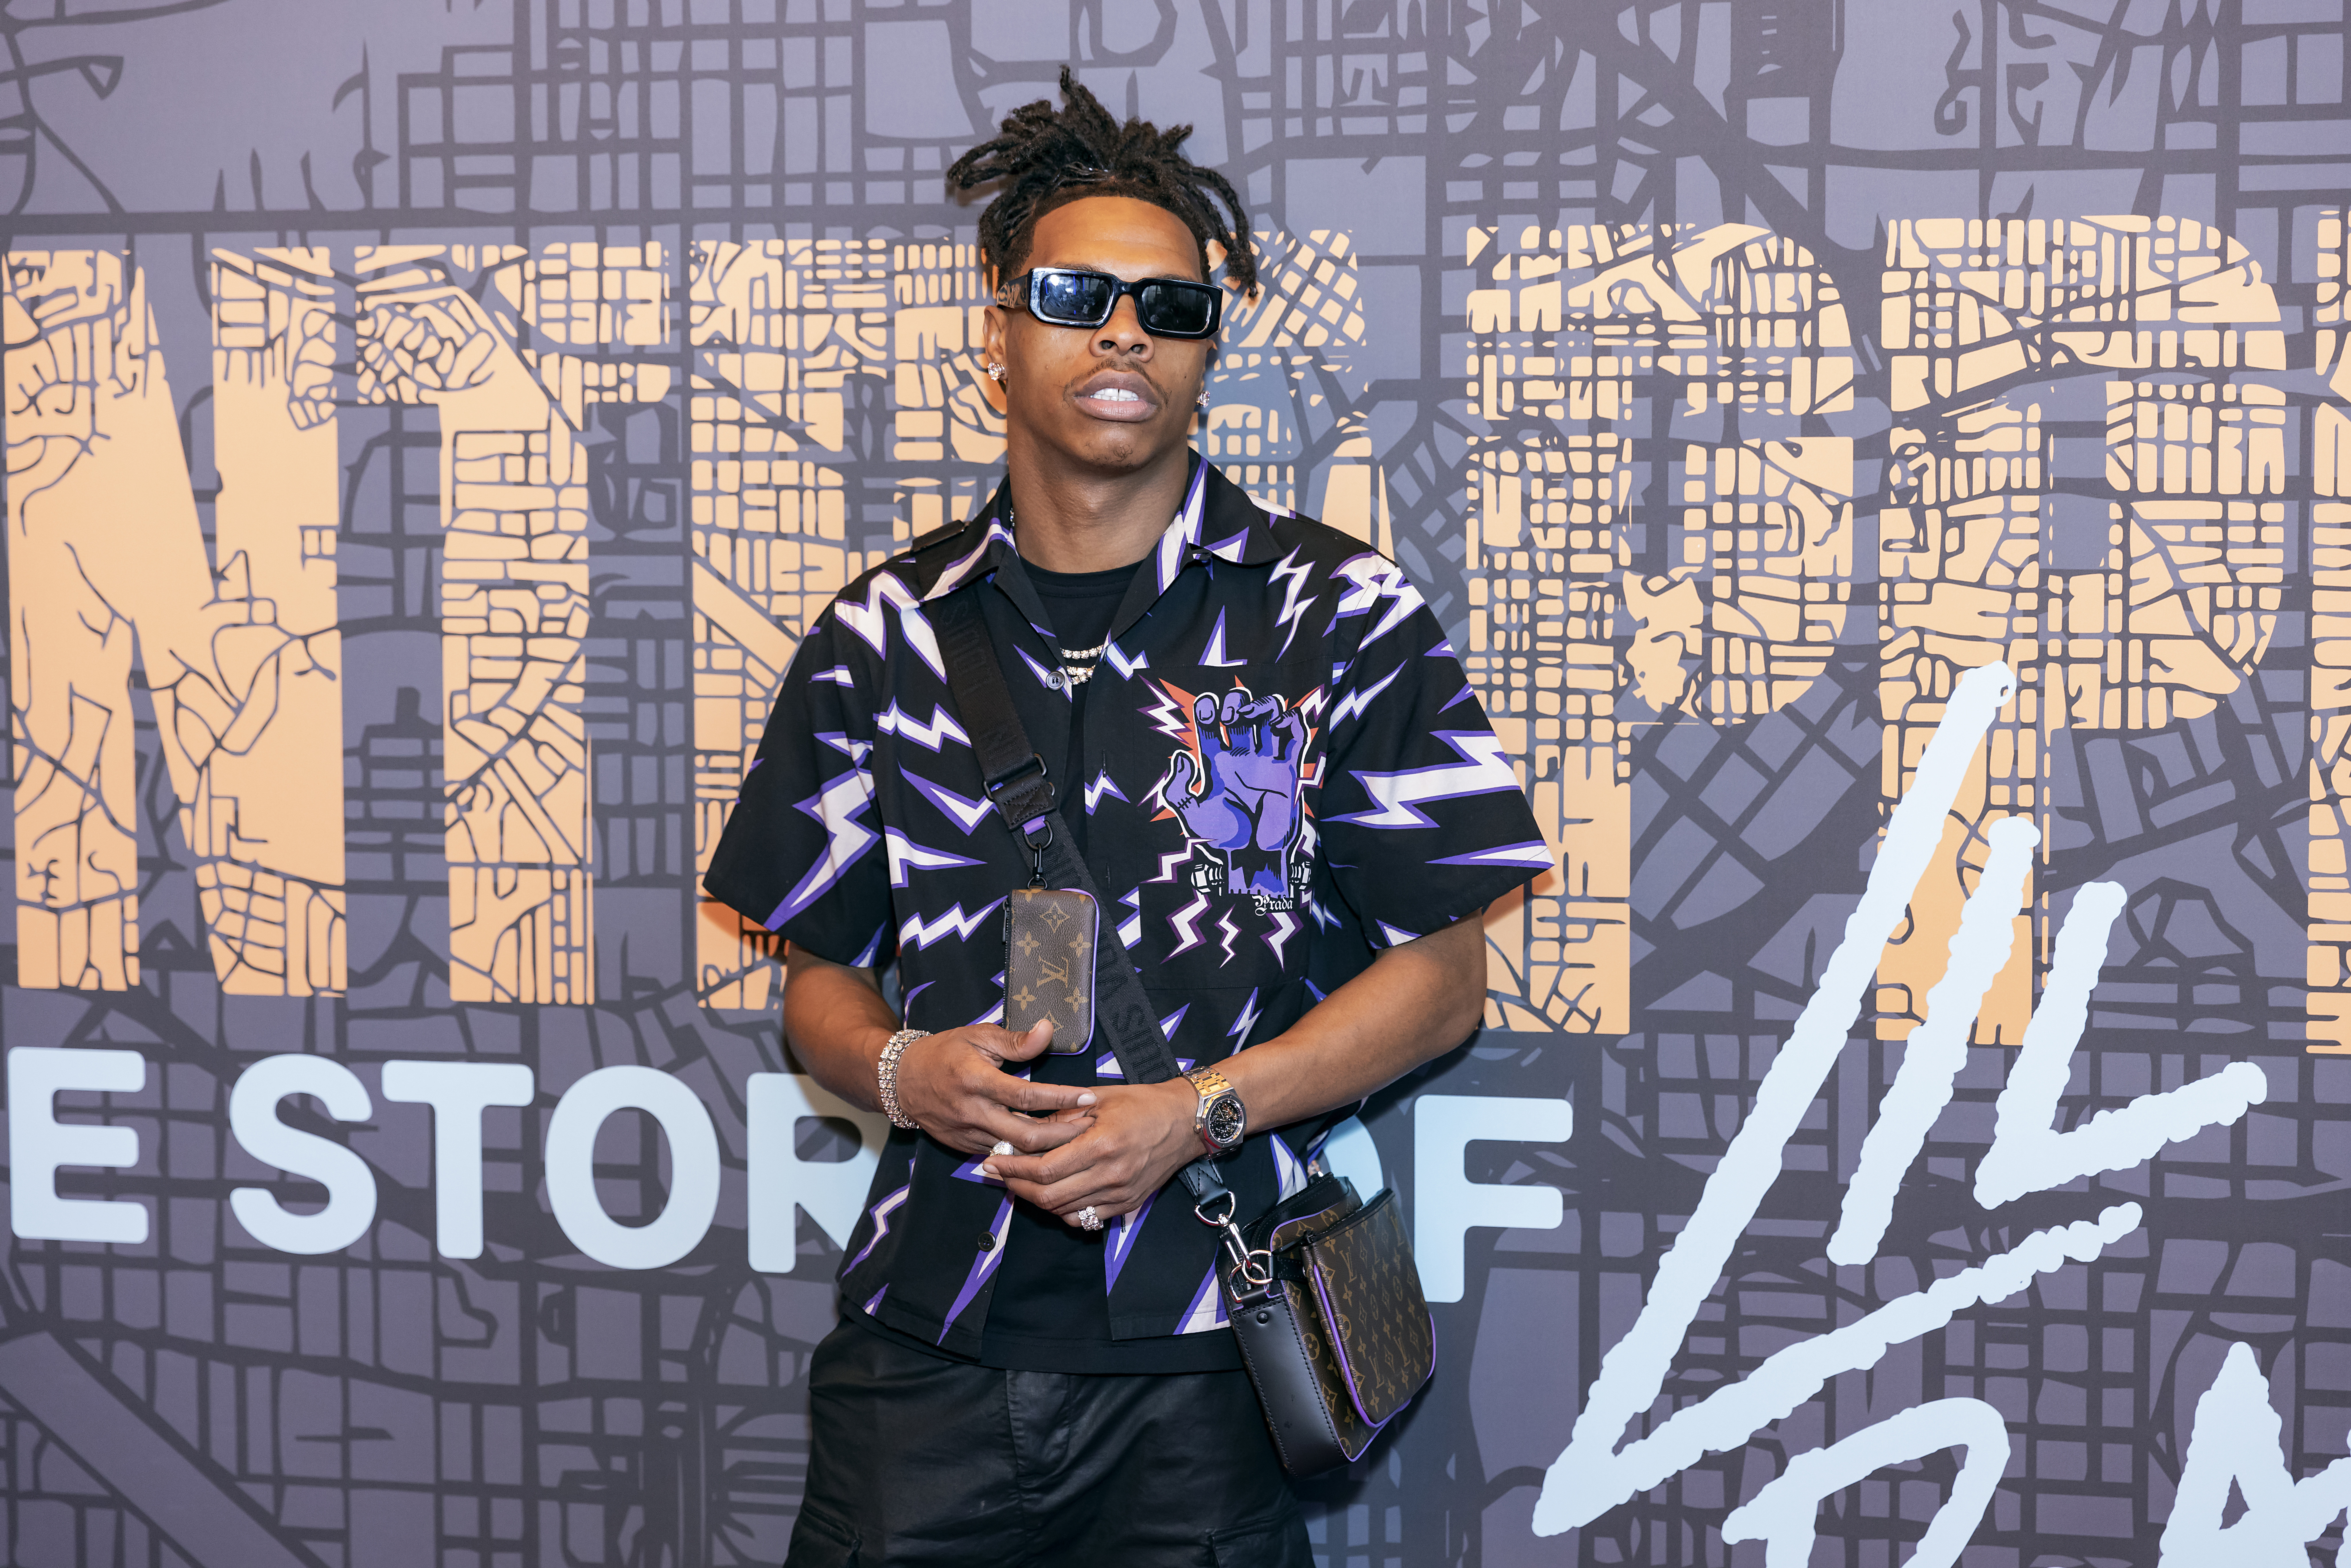 Lil Baby Attends Funeral For Bre’Asia Powell: “We Gotta Change”